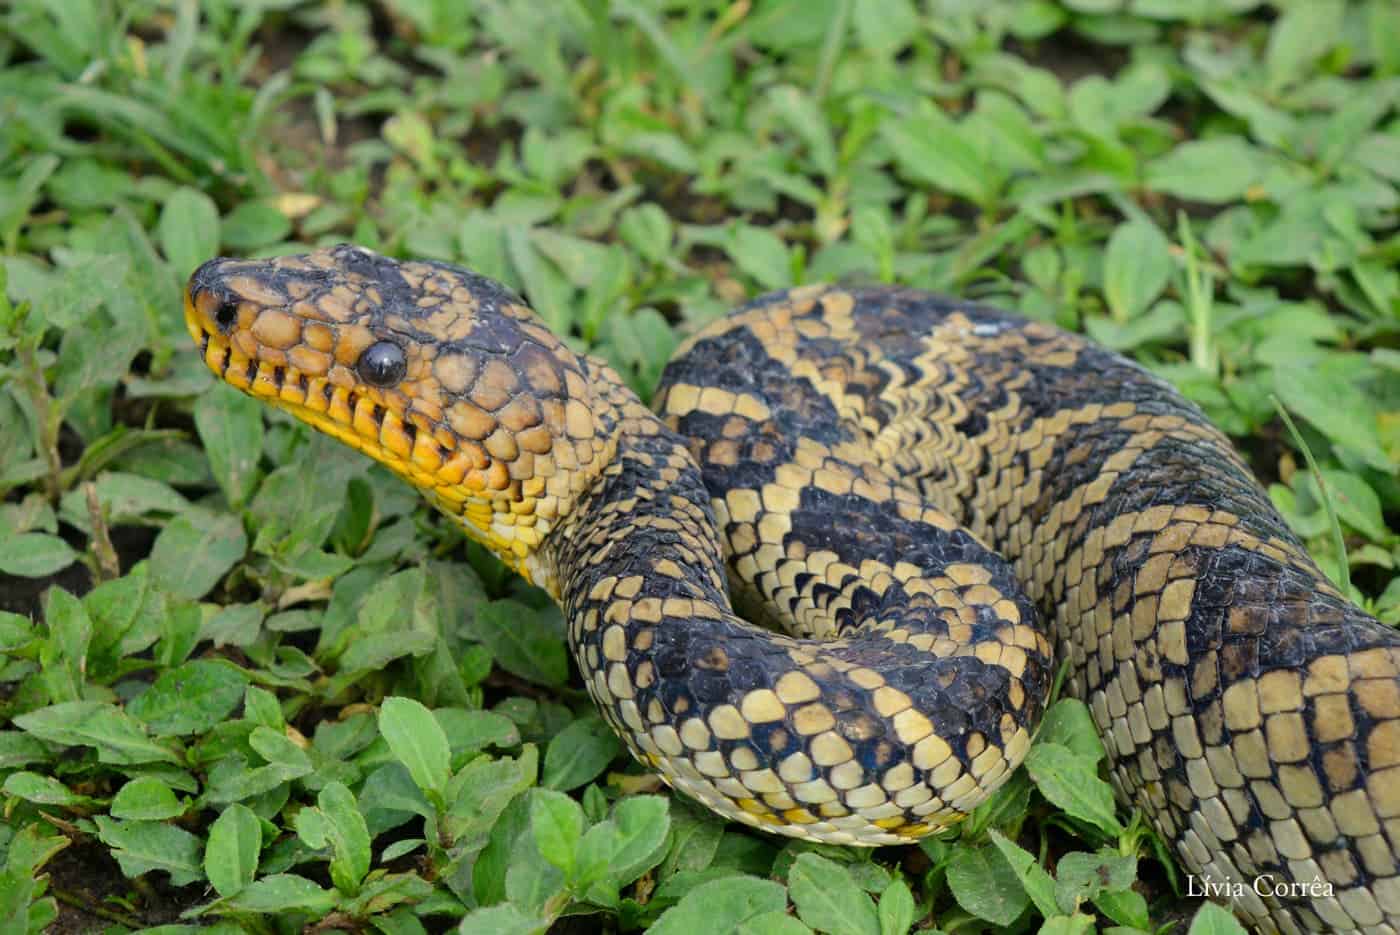 Cropan's boa (Corallus cropanii) inhabits a forest range in Brazil, and scientists recently glimpsed the first living specimen seen since 1953.
Credit: Lívia Corrêa/Instituto Butantan